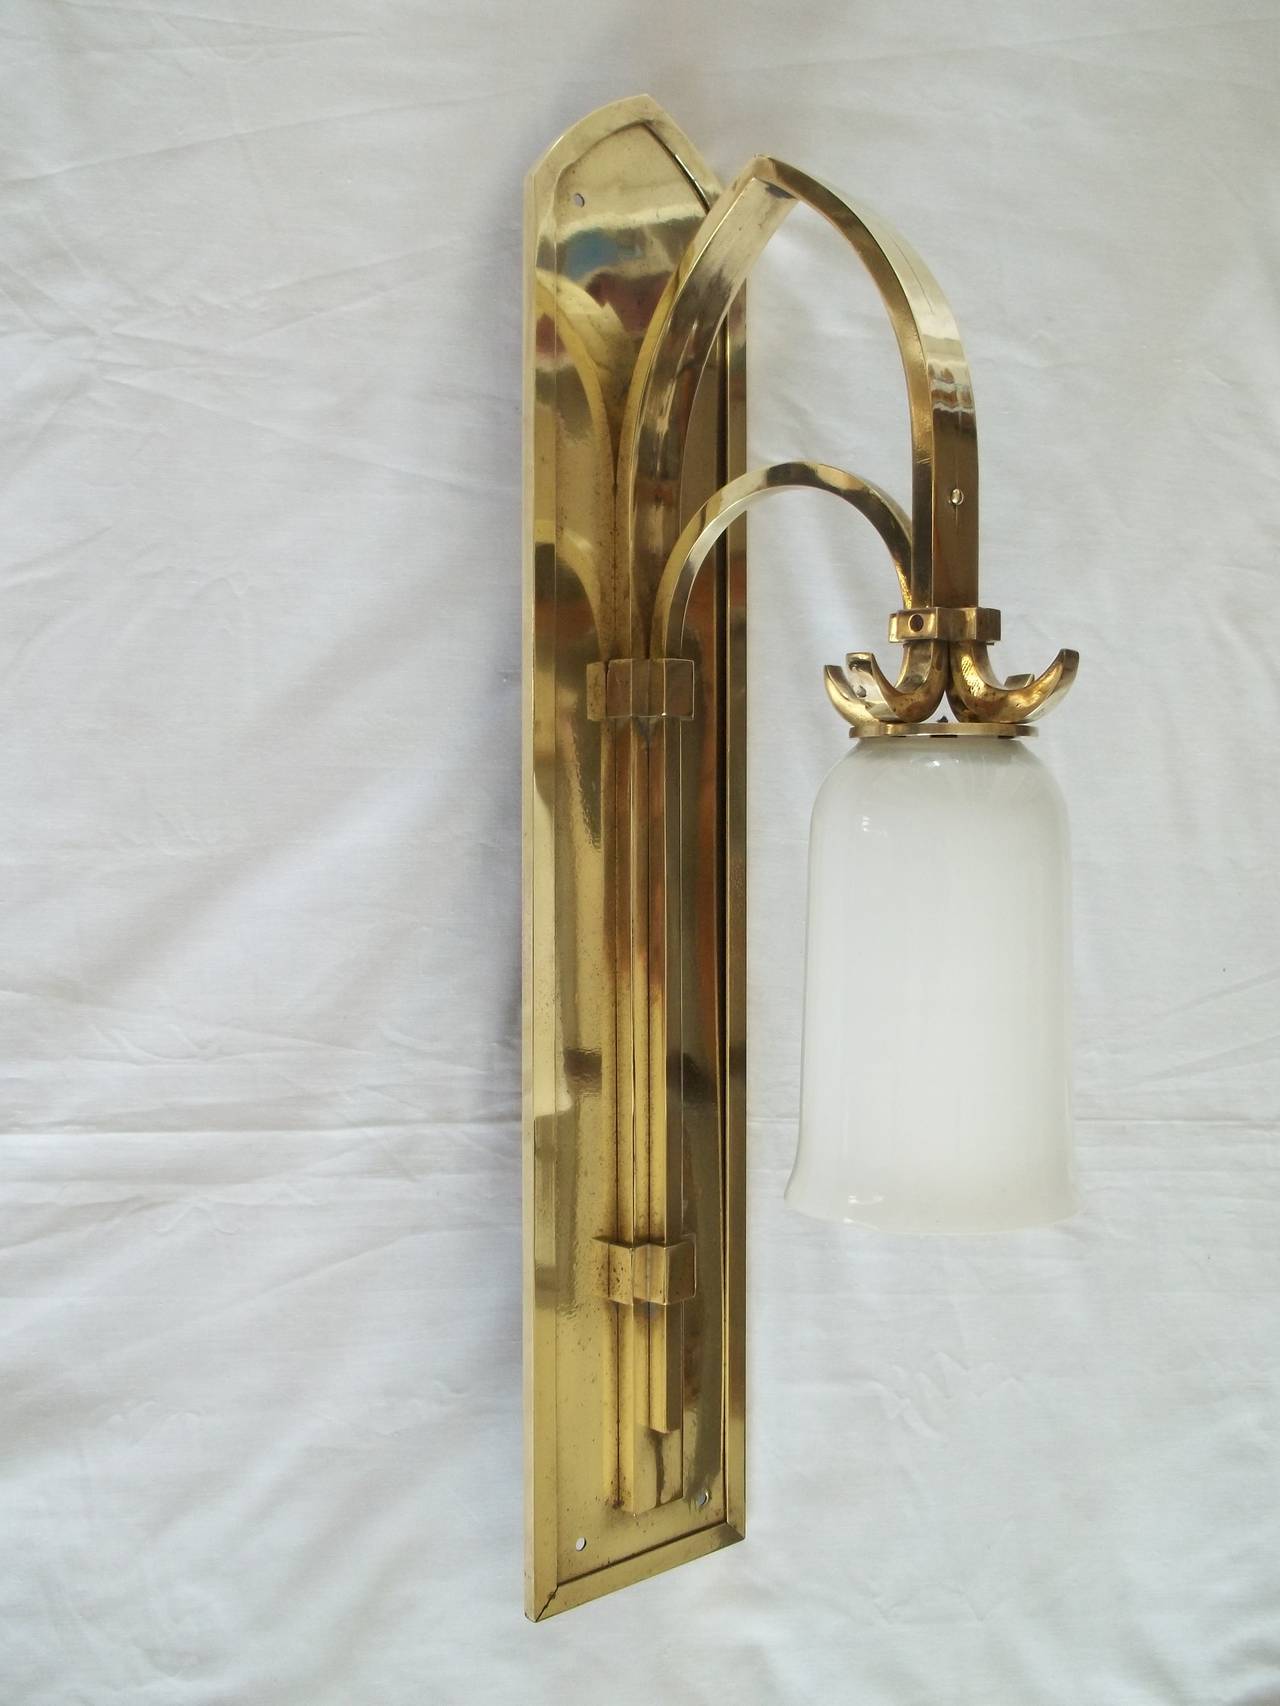 British Superb, PAIR of GOTHIC, (Revival), WALL LAMPS or LIGHTS, Brass, circa 1905